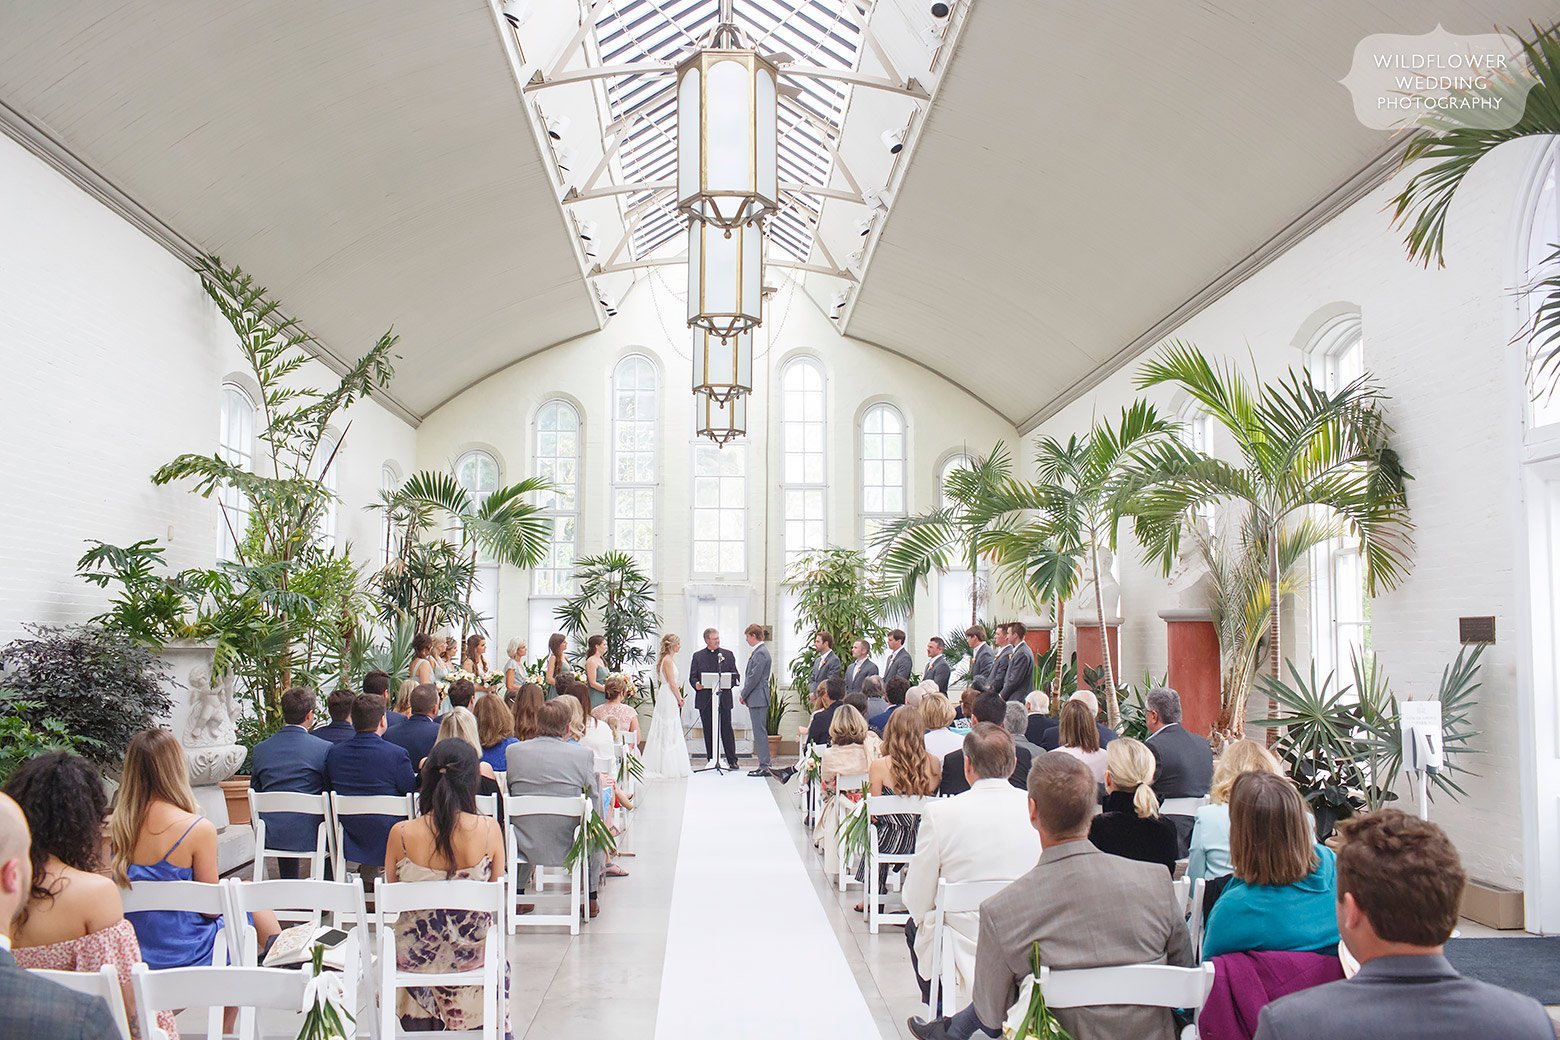 Indoor wedding ceremony at Piper Palm House in Tower Grove Park.